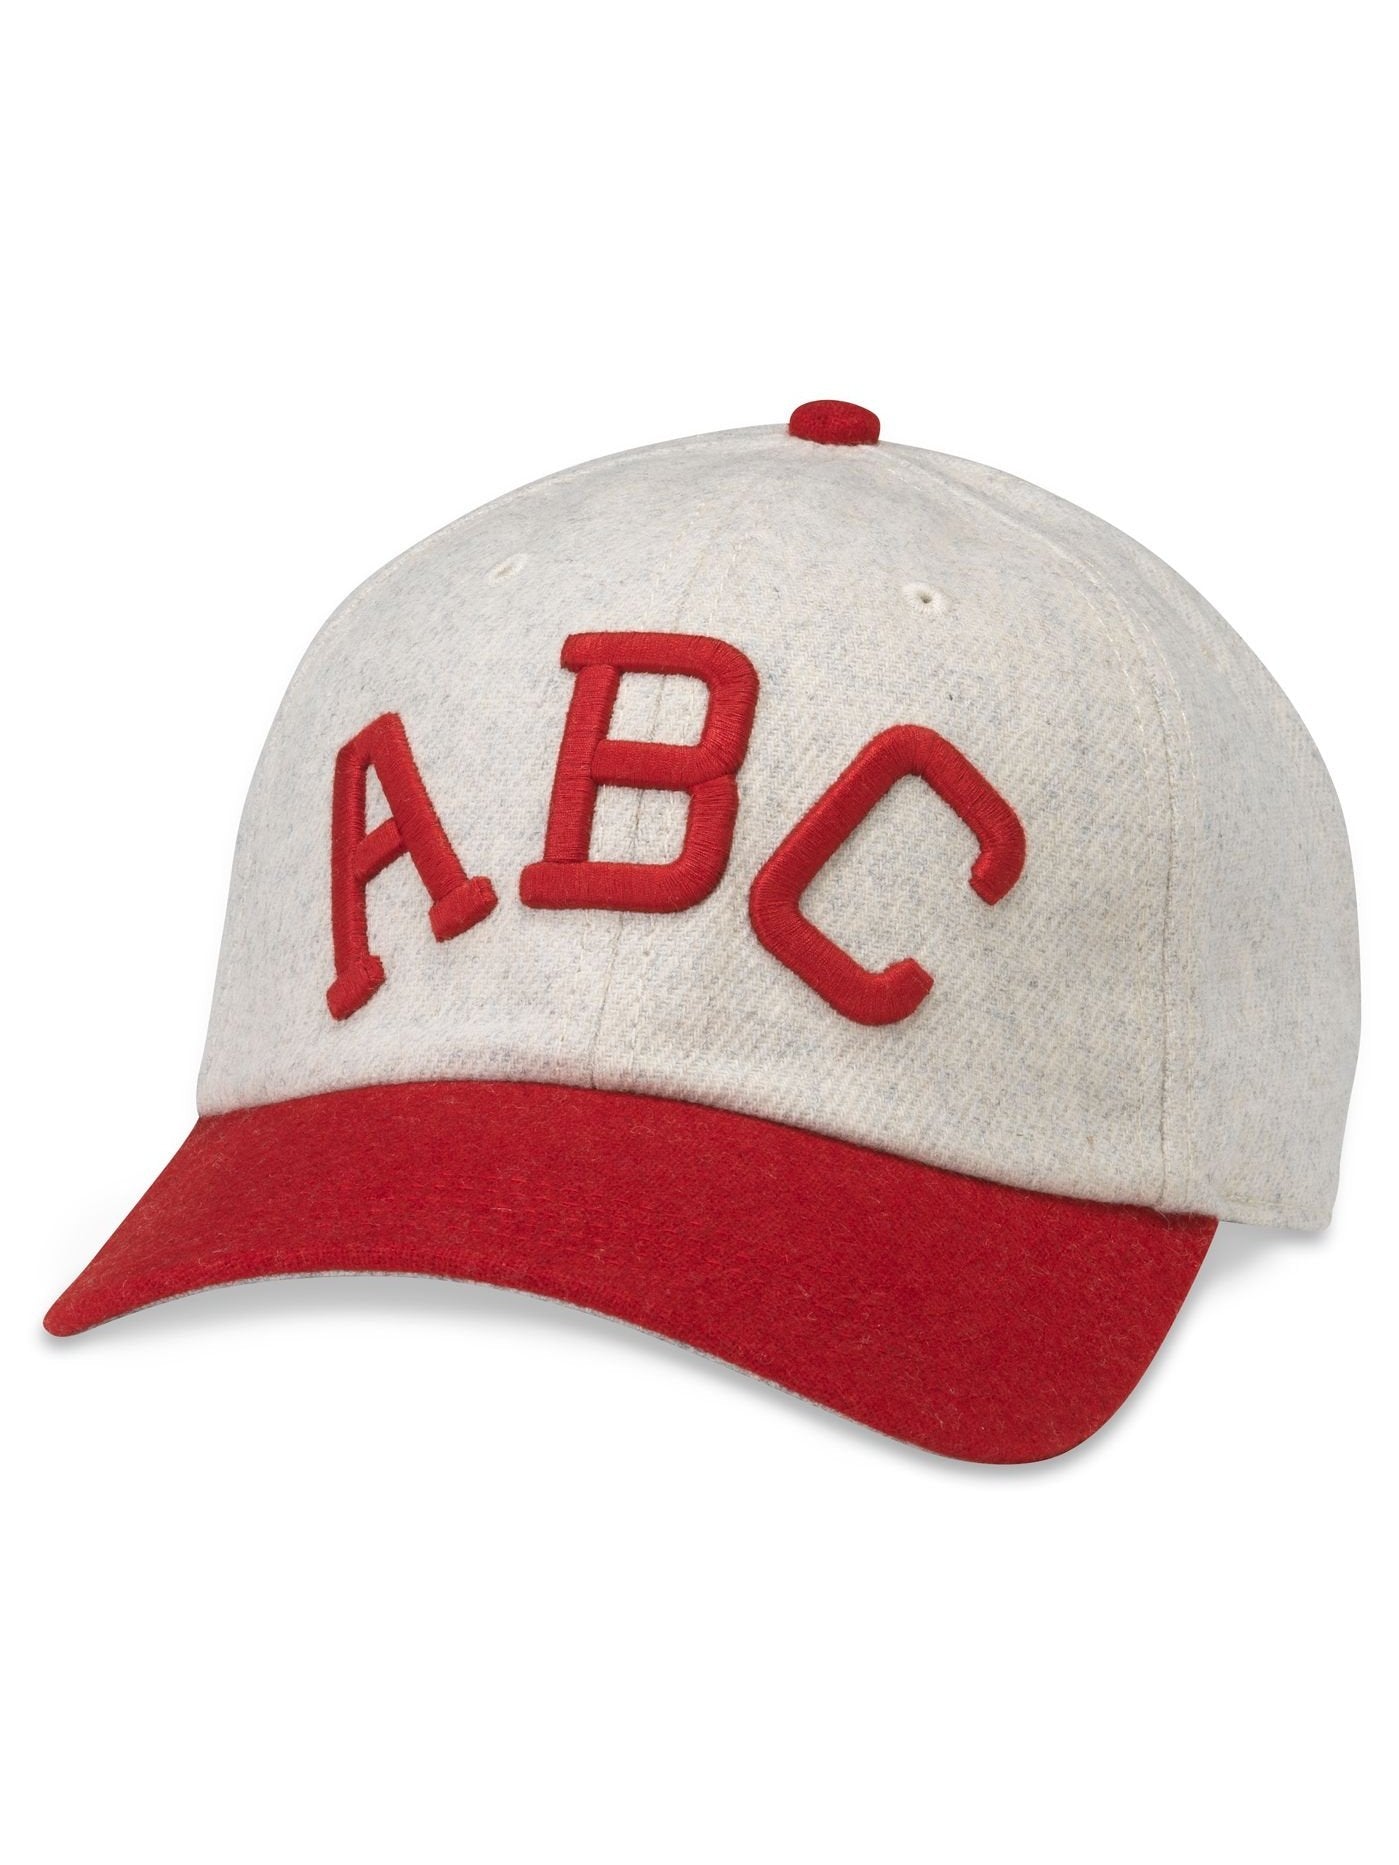 American Needle Indianapolis ABC NL Archive Legend Cap Ivory Red 21005A-INA.